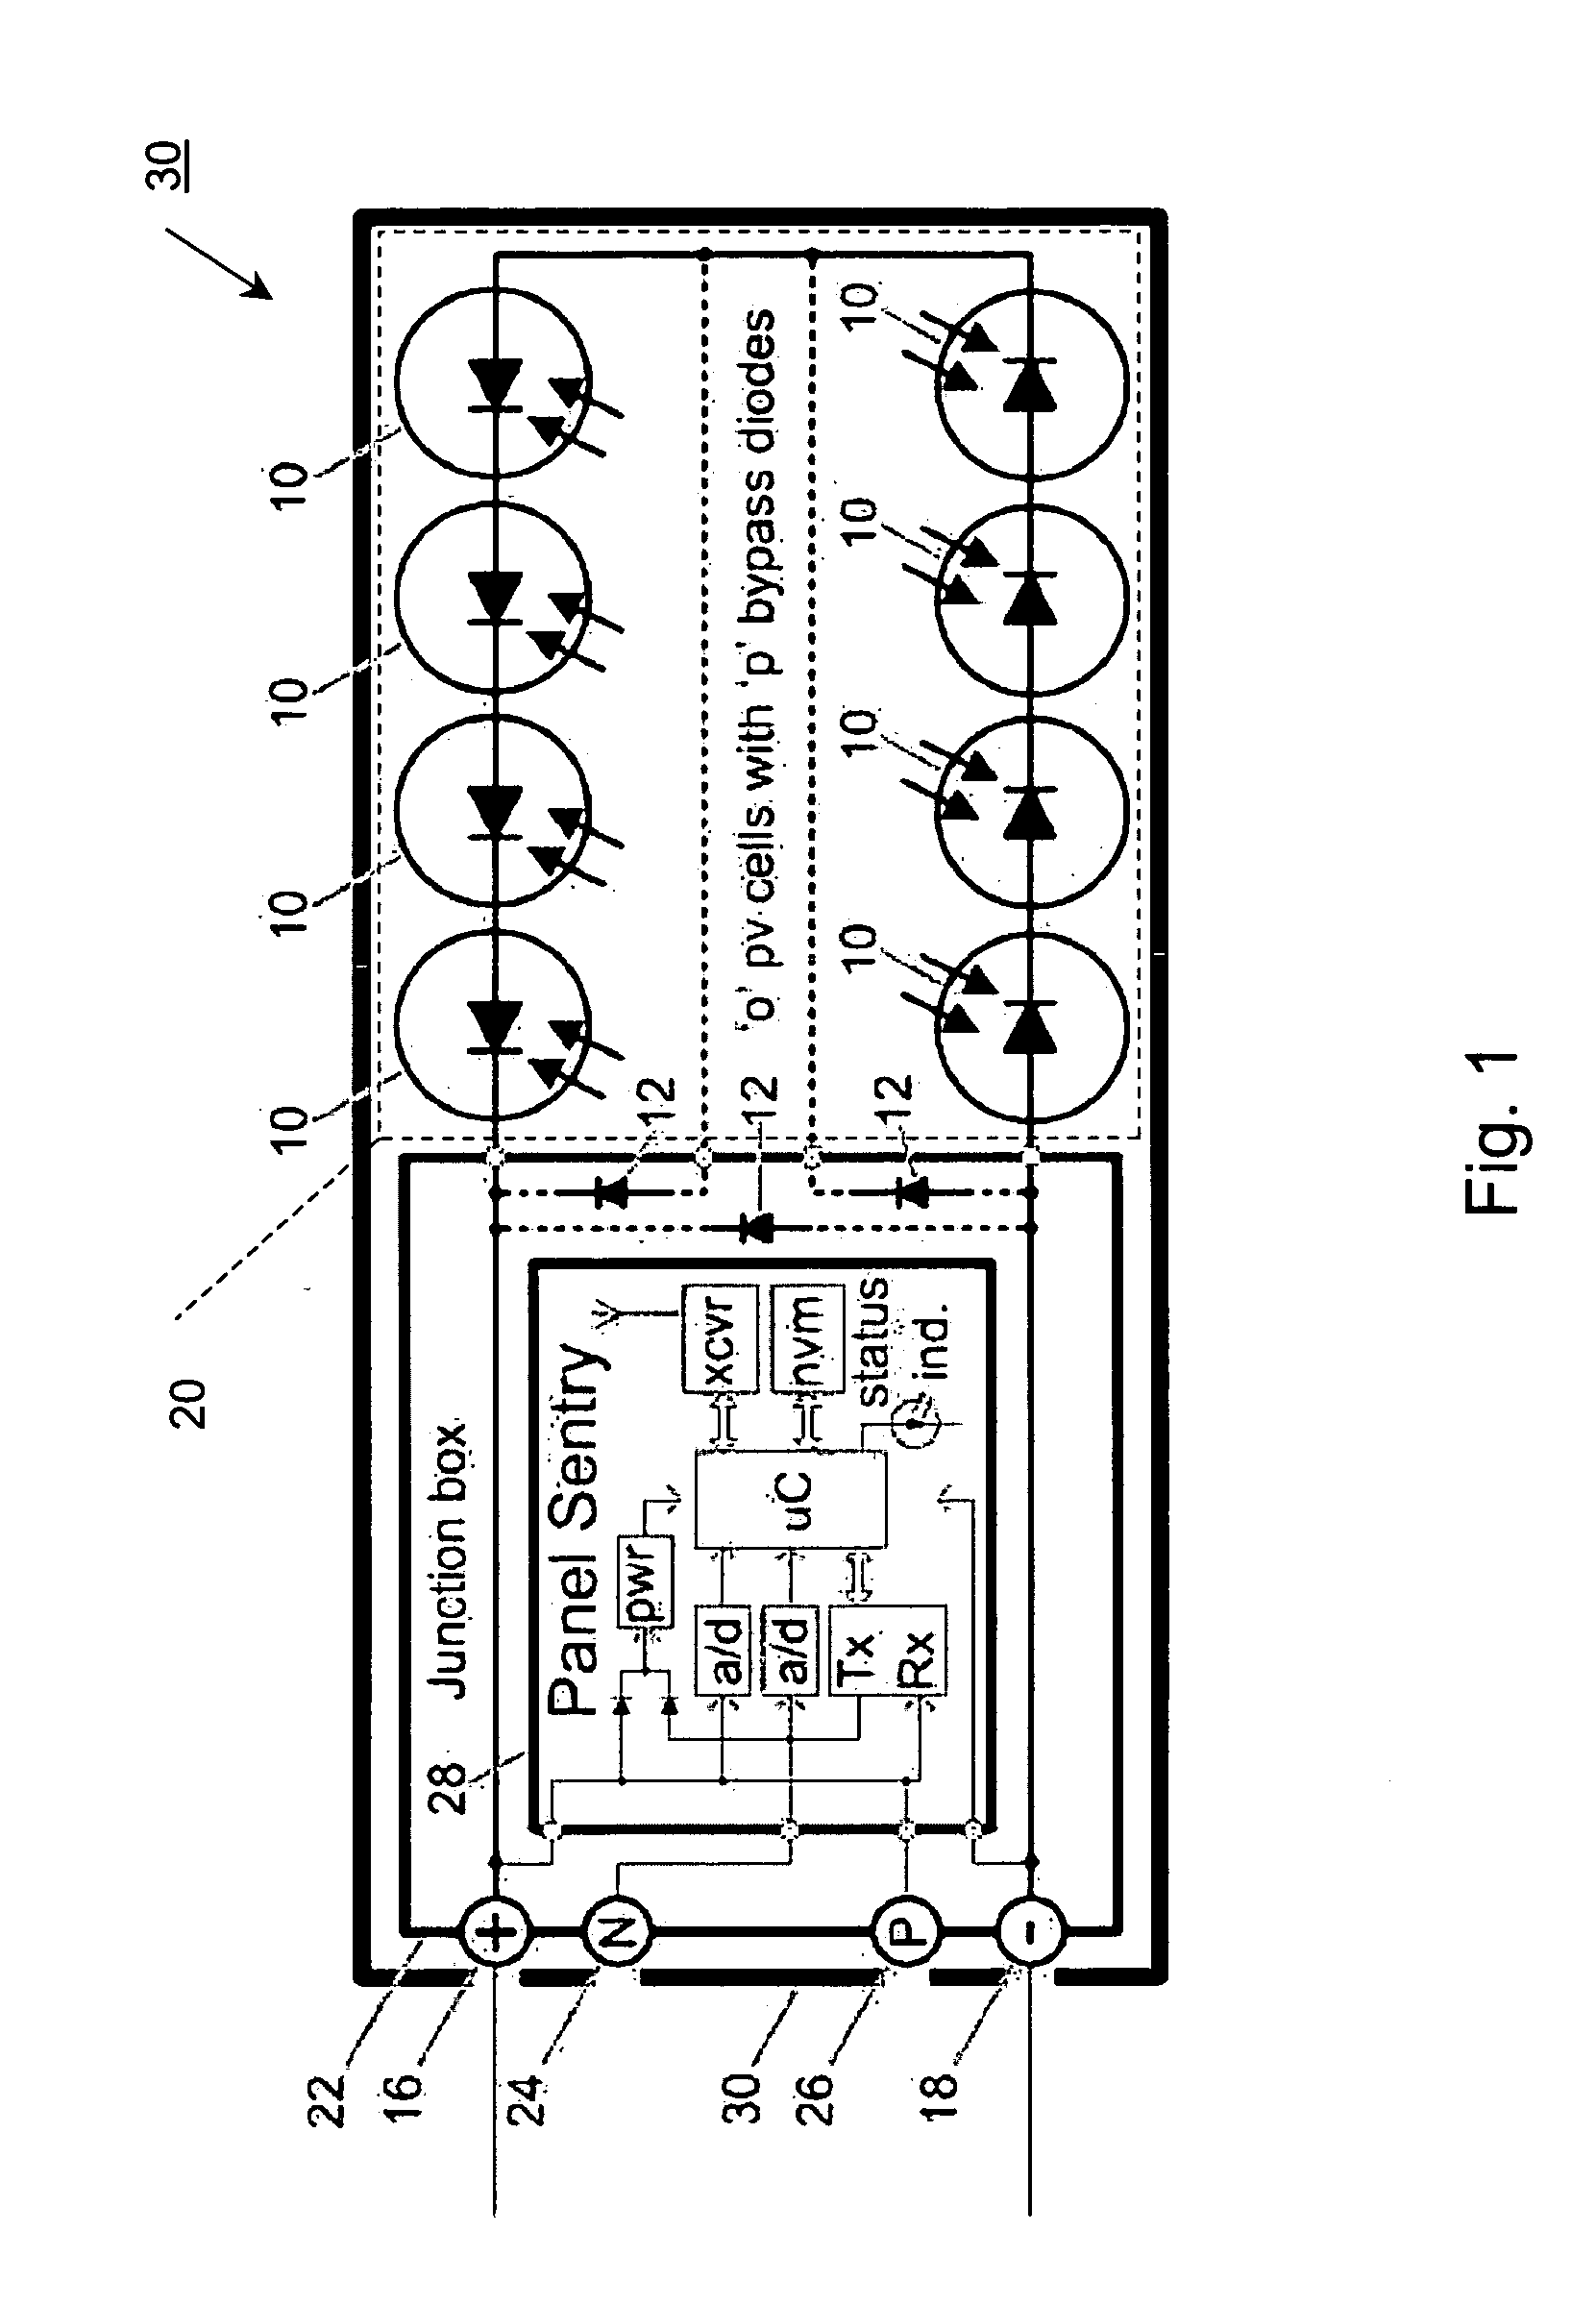 System and method for monitoring photovoltaic power generation systems